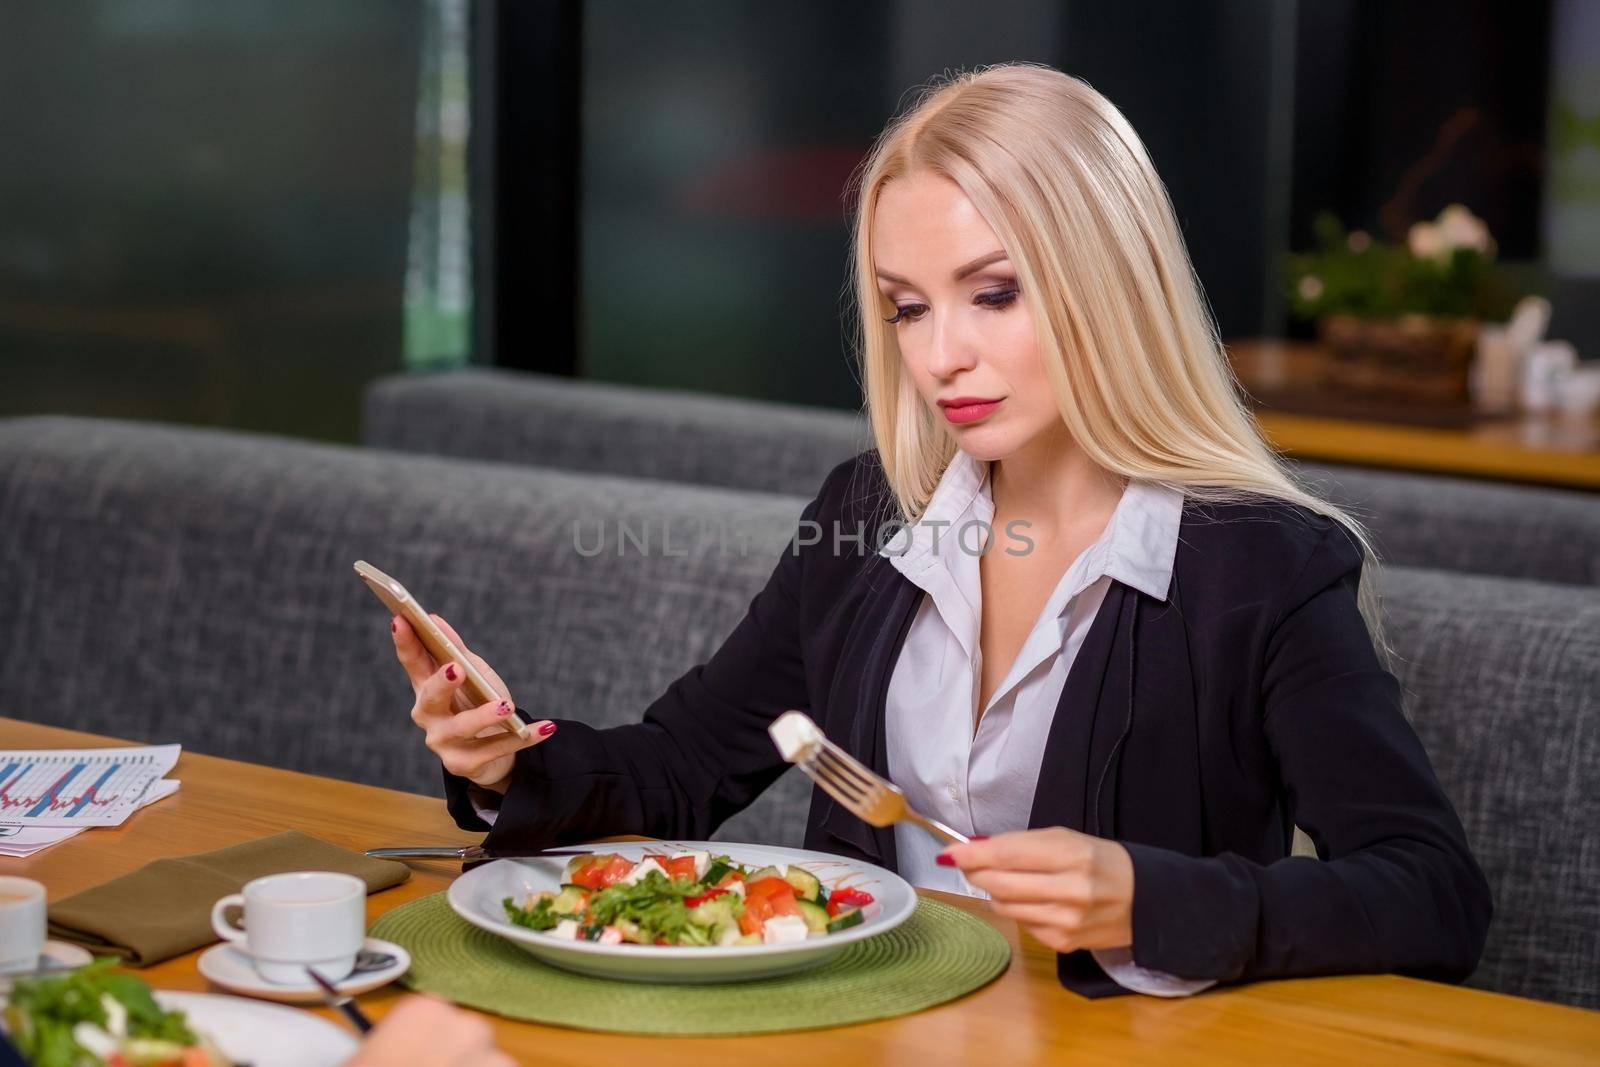 A woman and a man on a business lunch in a restaurant